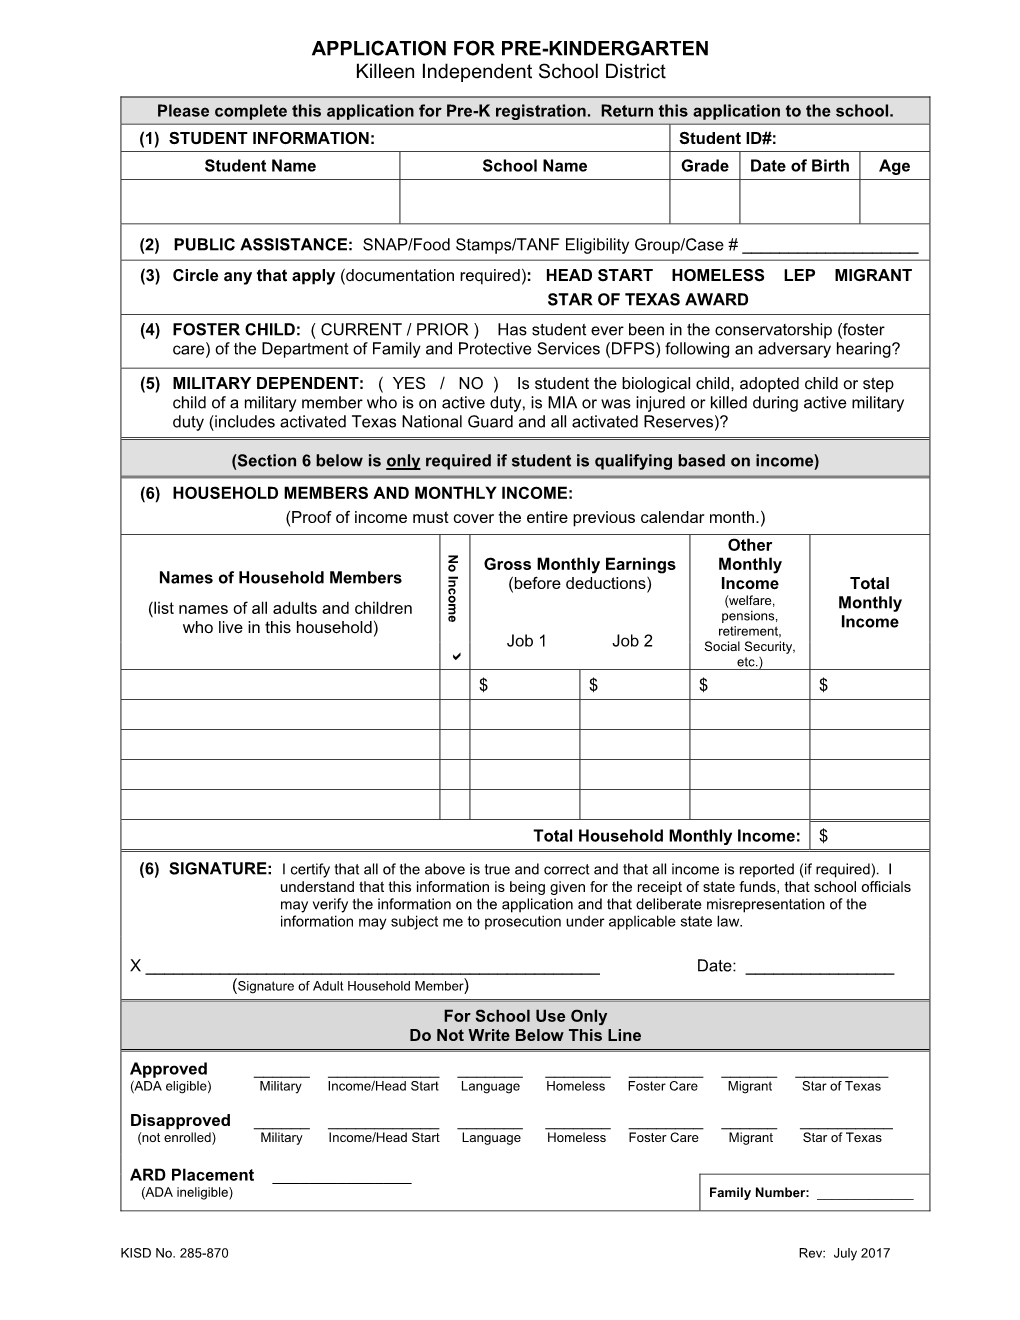 Please Complete This Application for Pre-K Registration